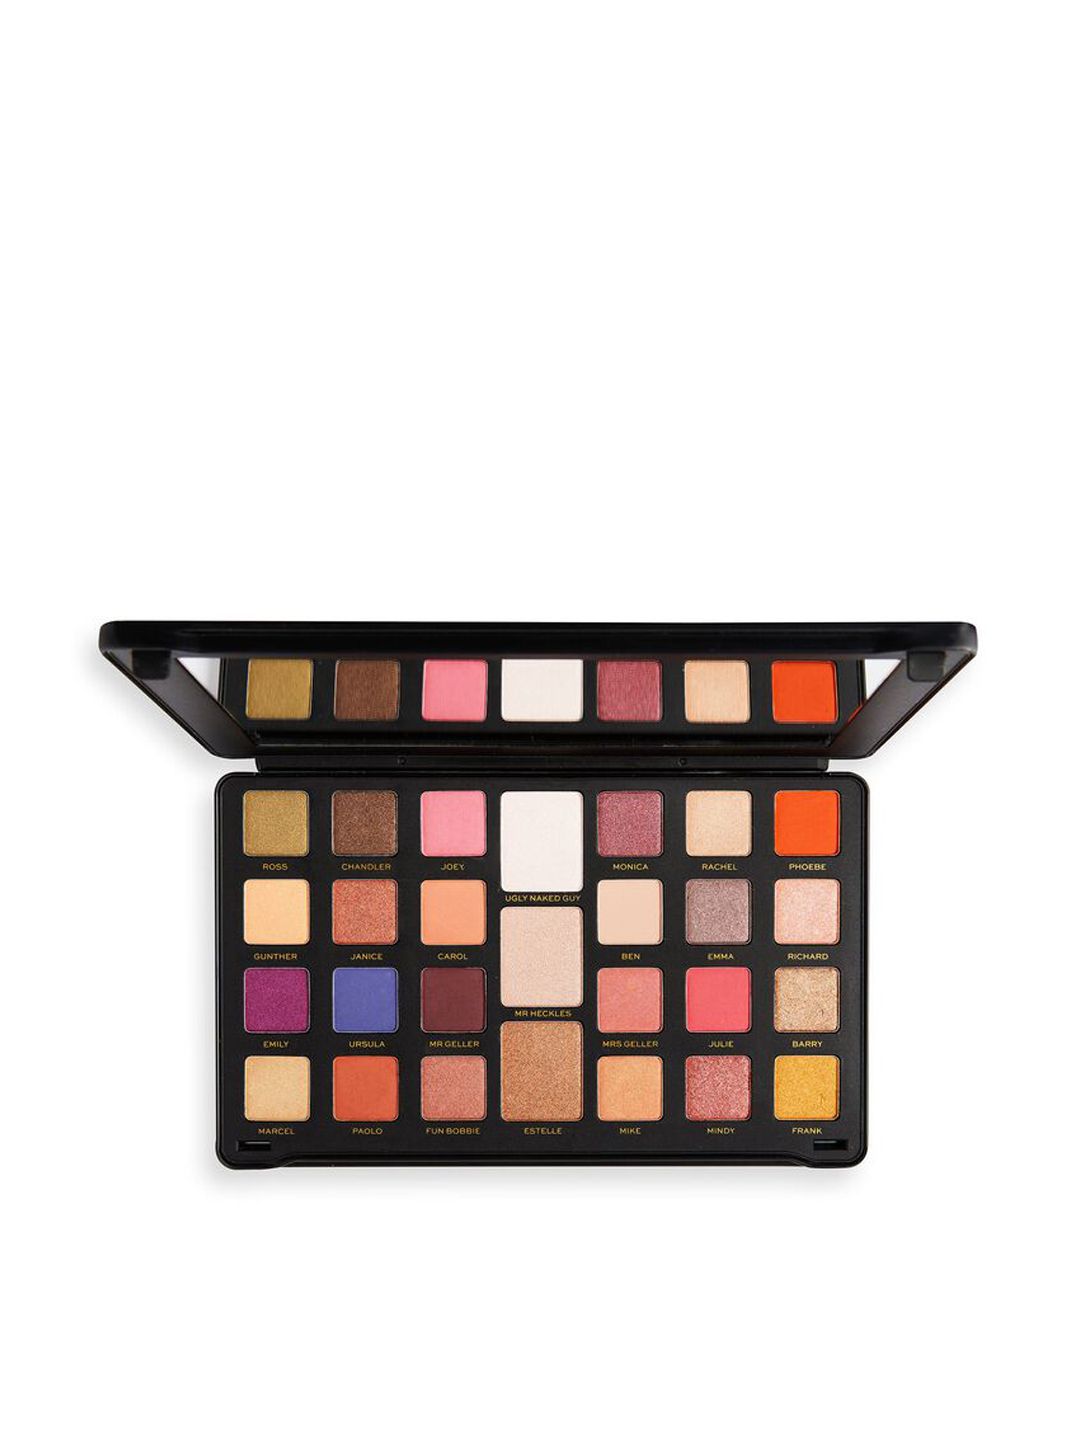 Makeup Revolution X Friends The Television Series Eyeshadow Palette - Flawless Limitless Price in India